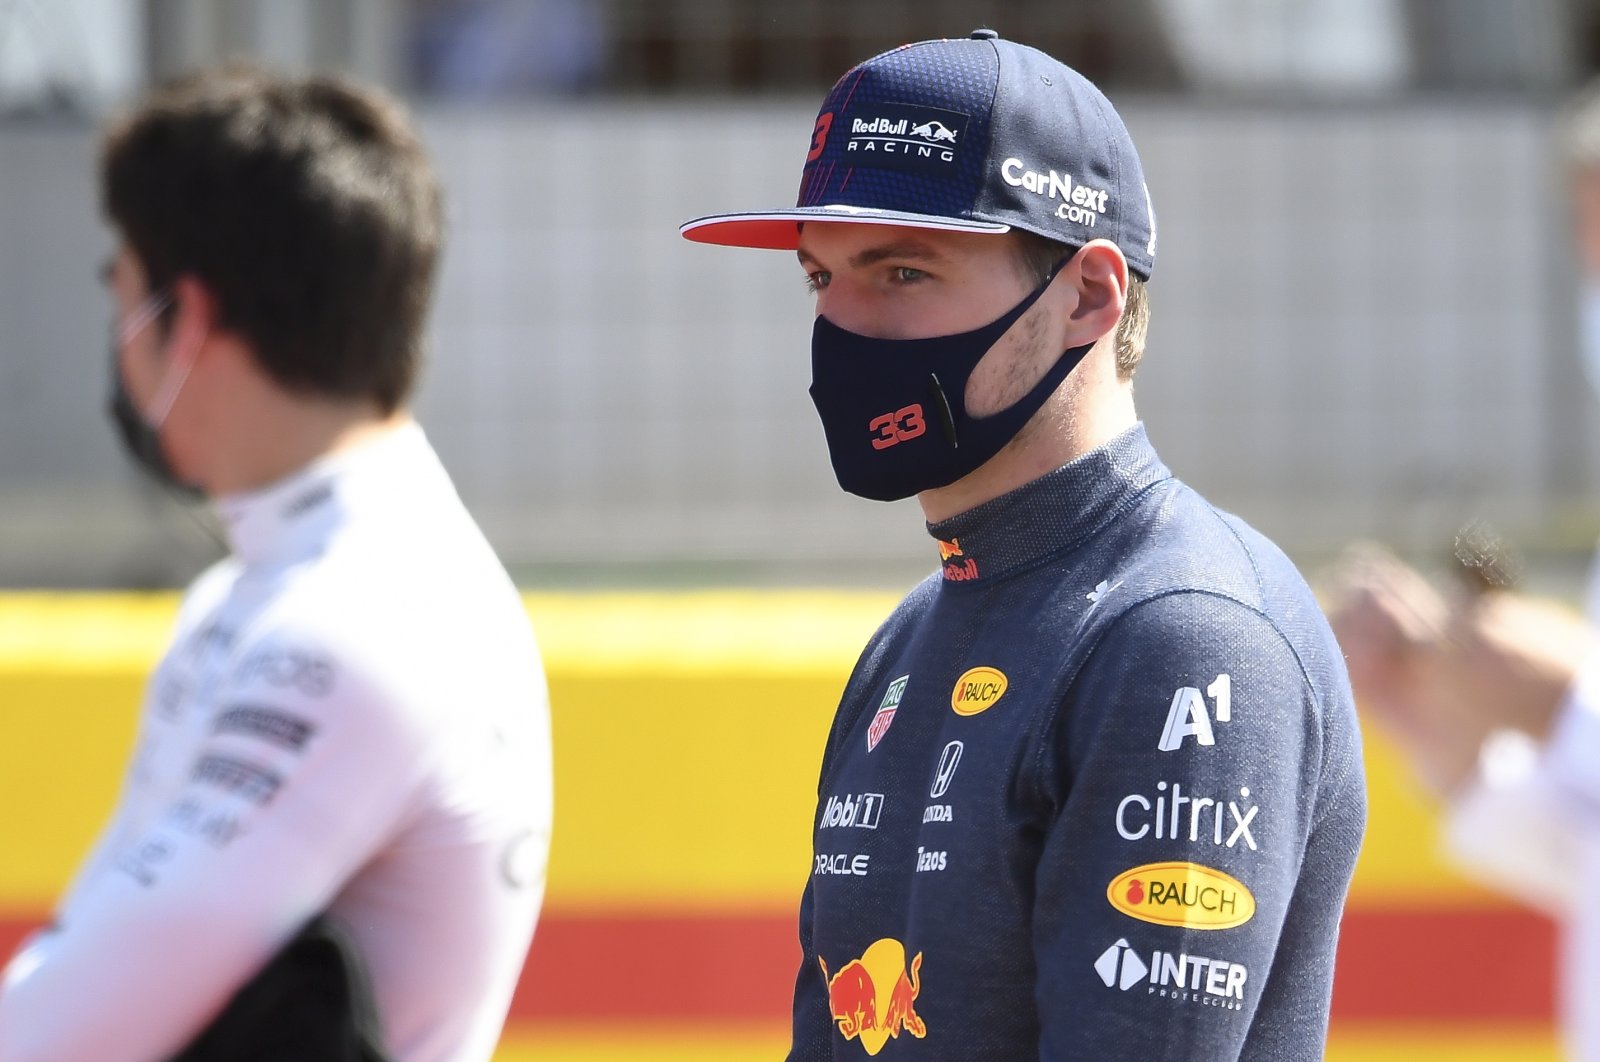 Dutch Formula One driver Max Verstappen of Red Bull Racing reacts on the grid prior to the Formula One Grand Prix of Great Britain at the Silverstone Circuit, in Northamptonshire, Britain, July 18, 2021. (EPA Photo)